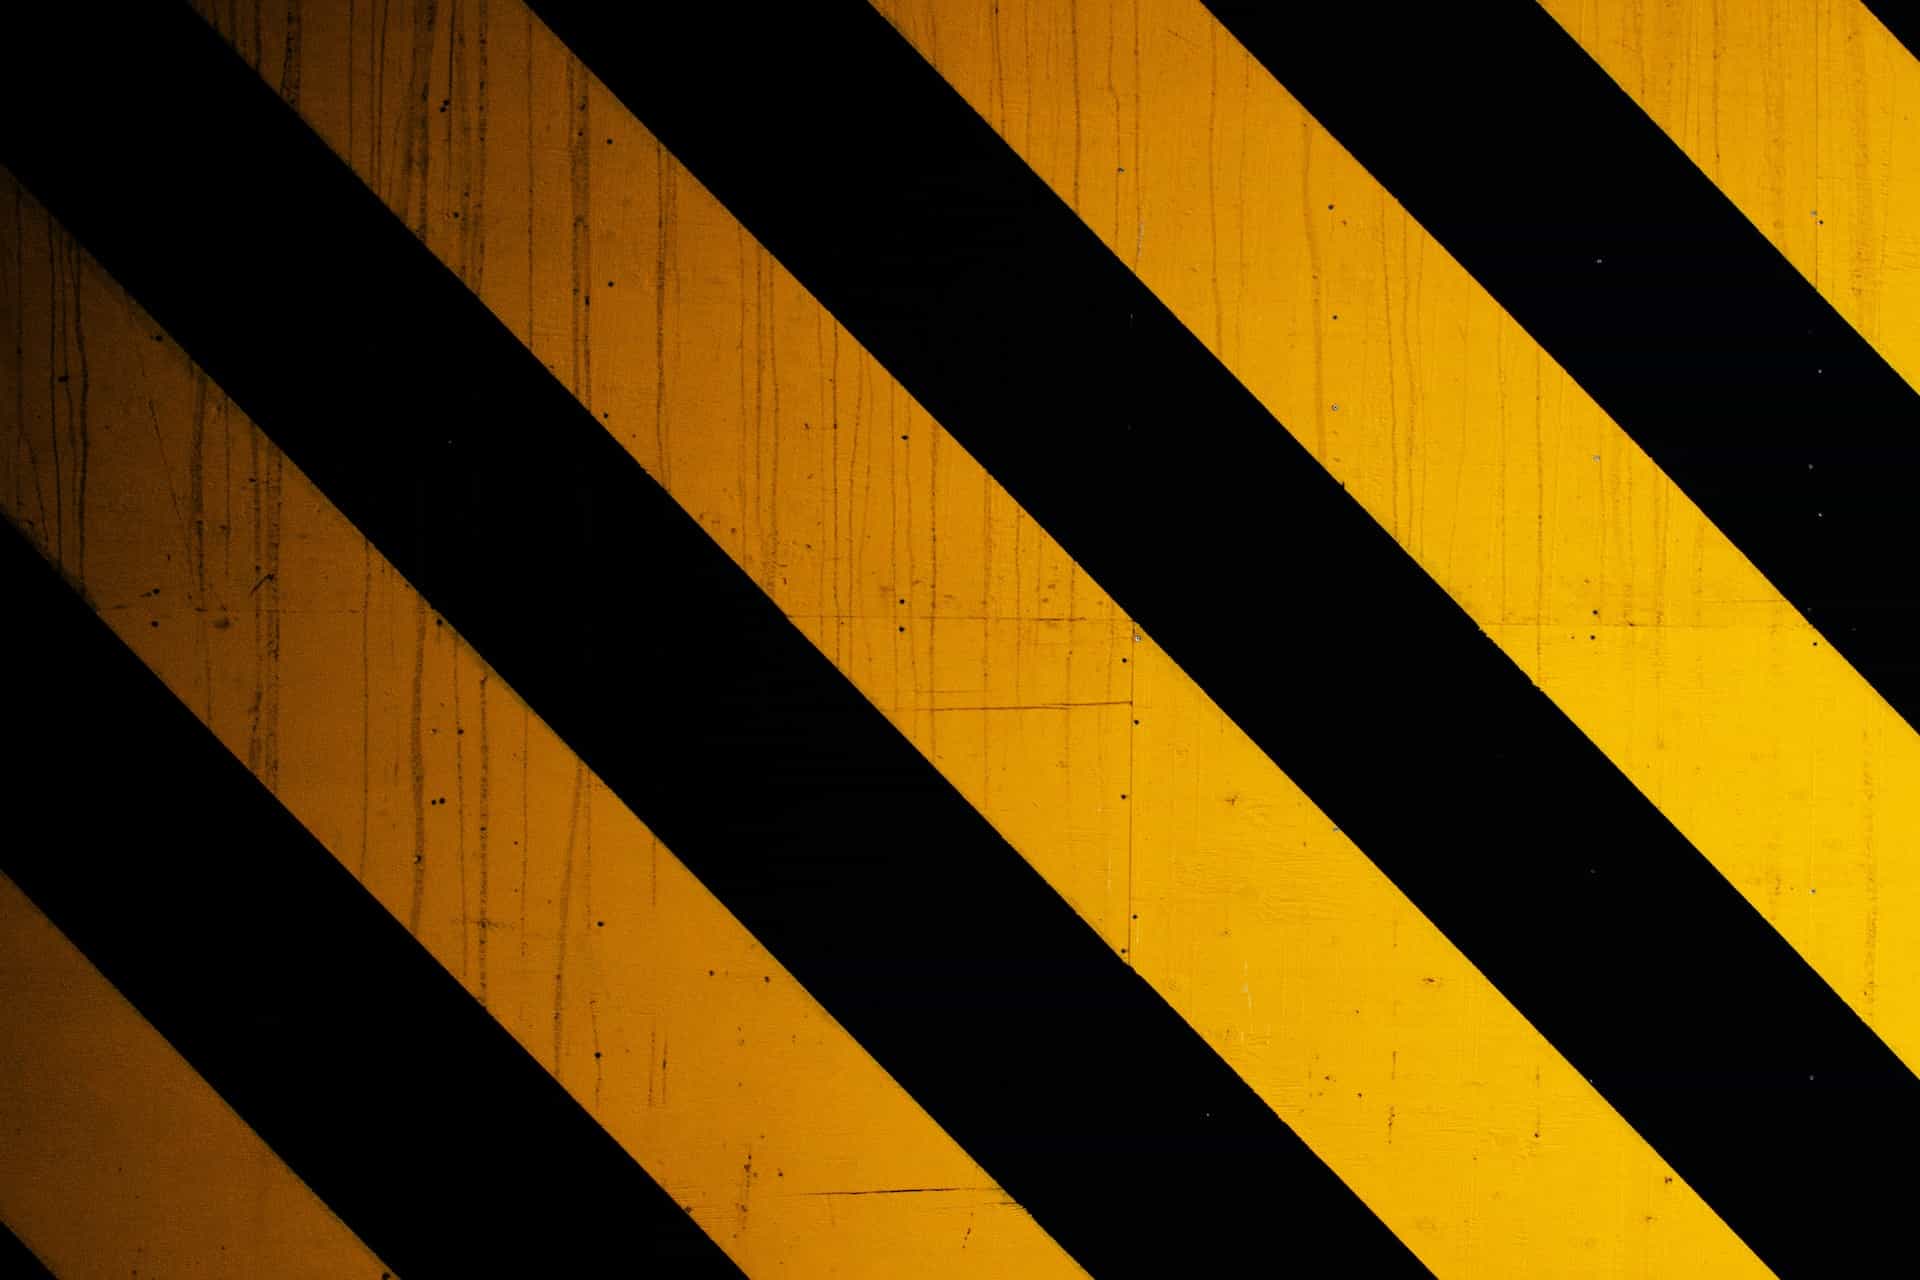 Yellow and black striped diagonal lines in a warning pattern.